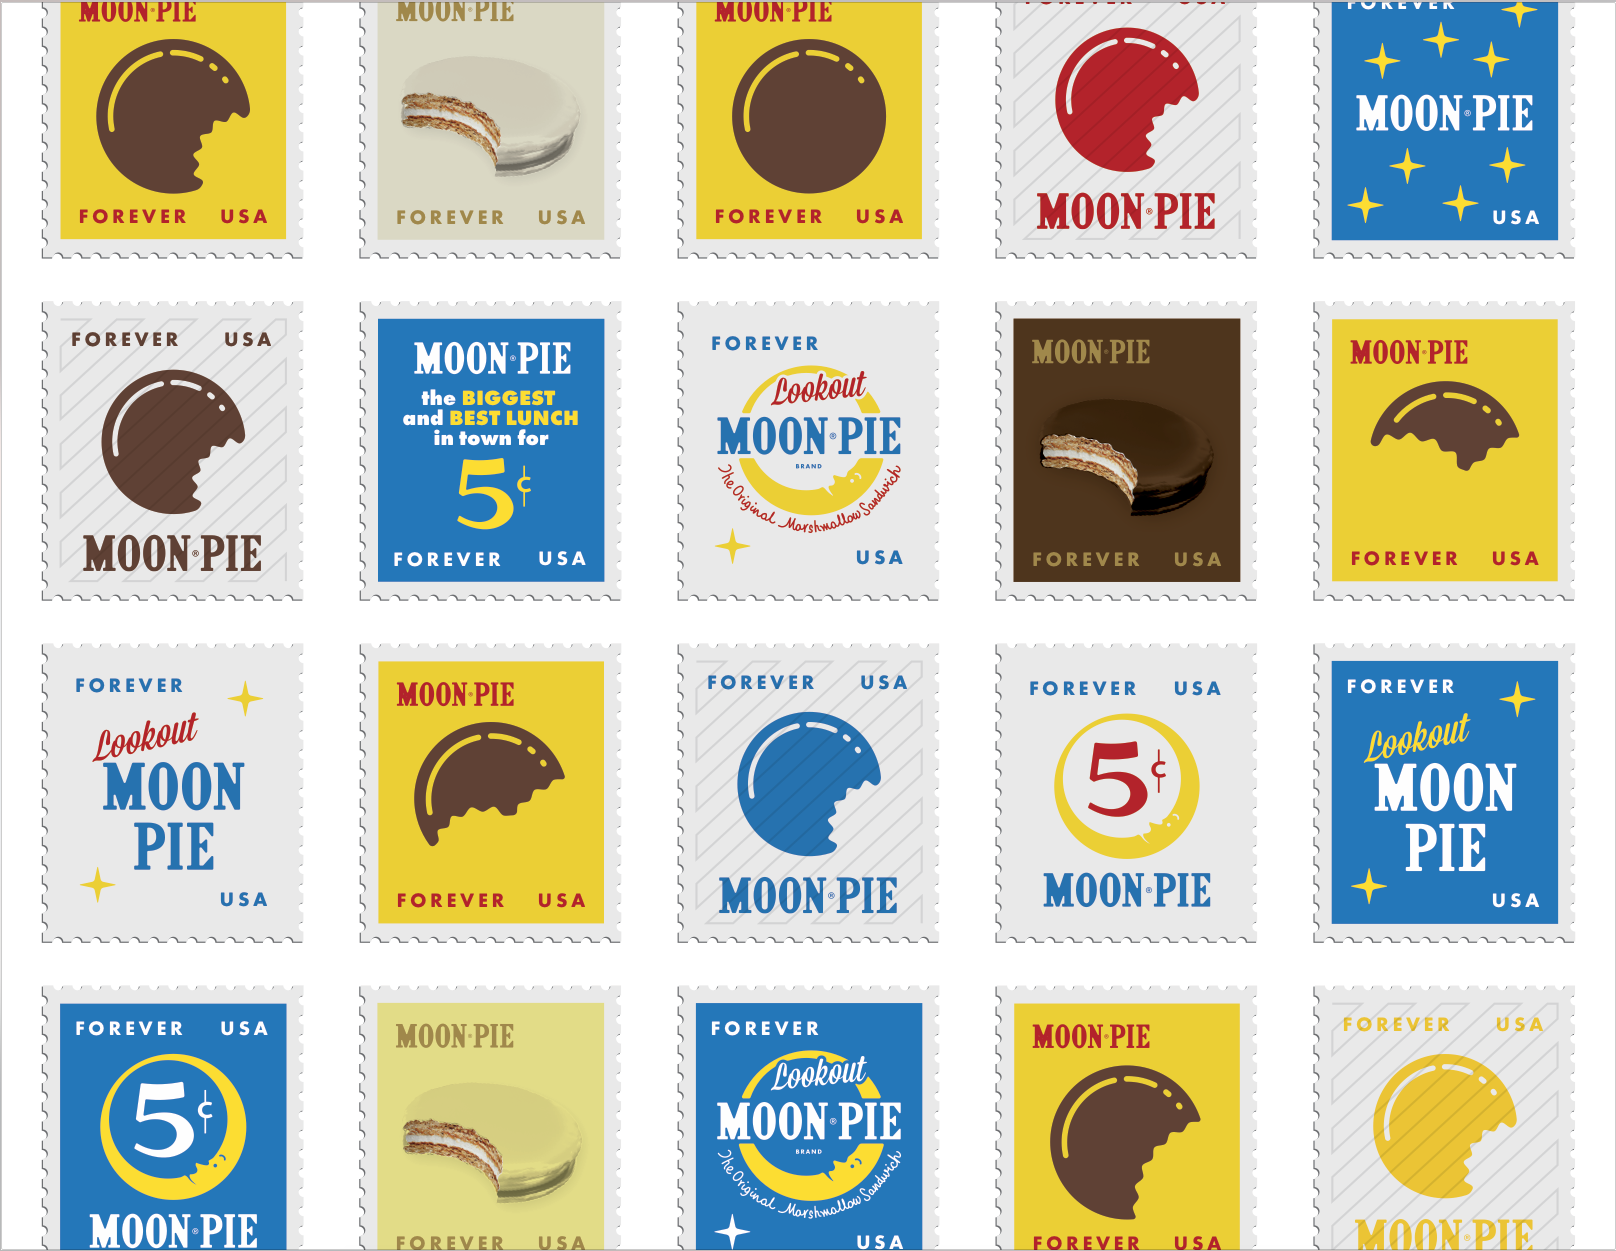 MoonPie stamp Screen Shot 2017-11-14 at 1.31.13 PM.png